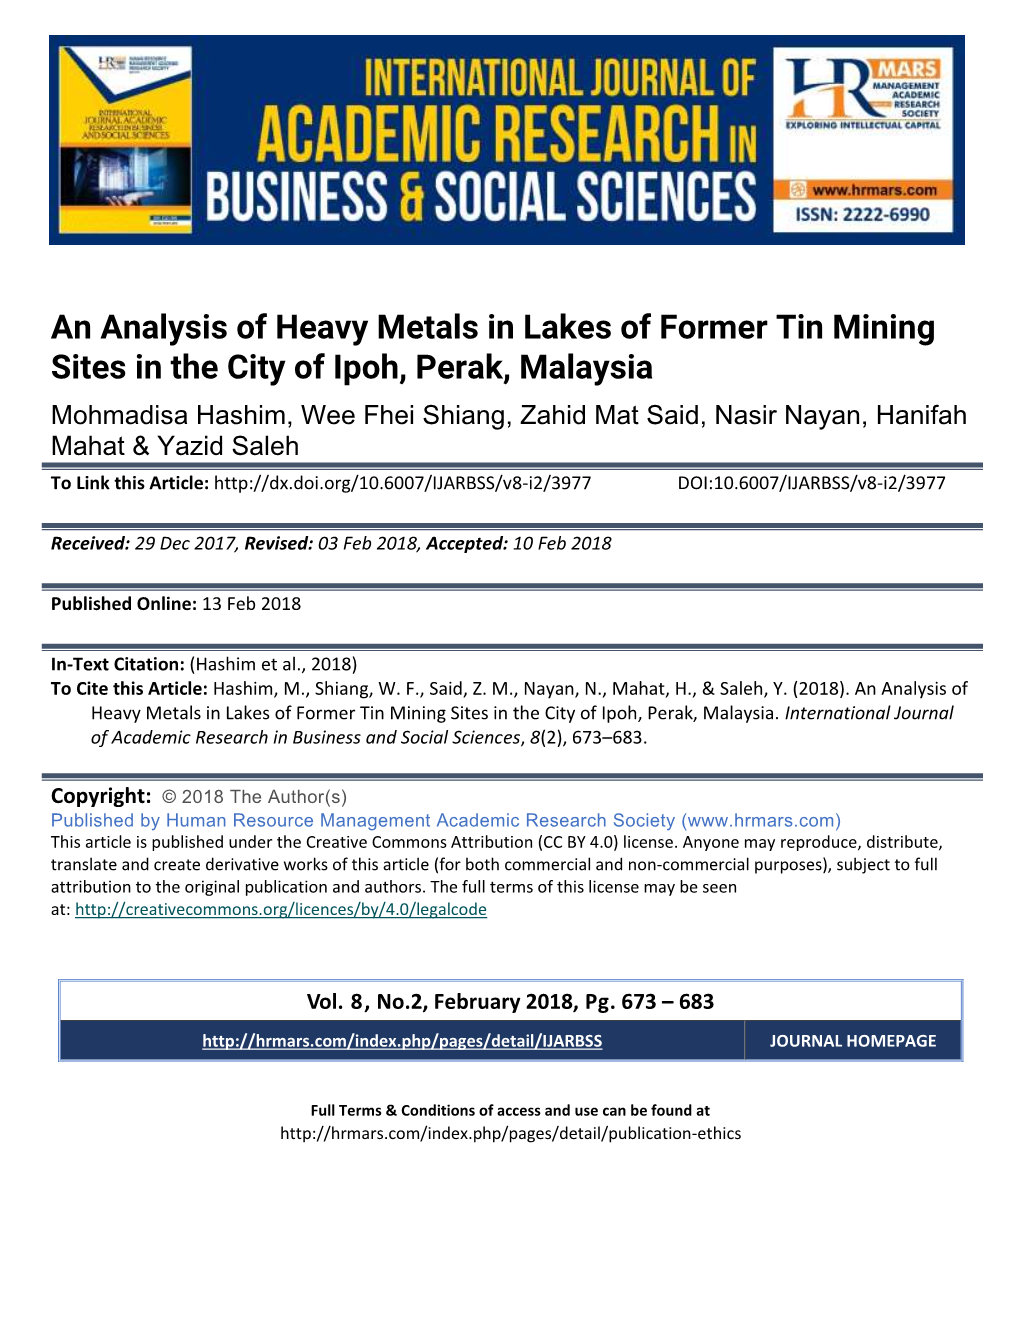 An Analysis of Heavy Metals in Lakes of Former Tin Mining Sites in the City of Ipoh, Perak, Malaysia